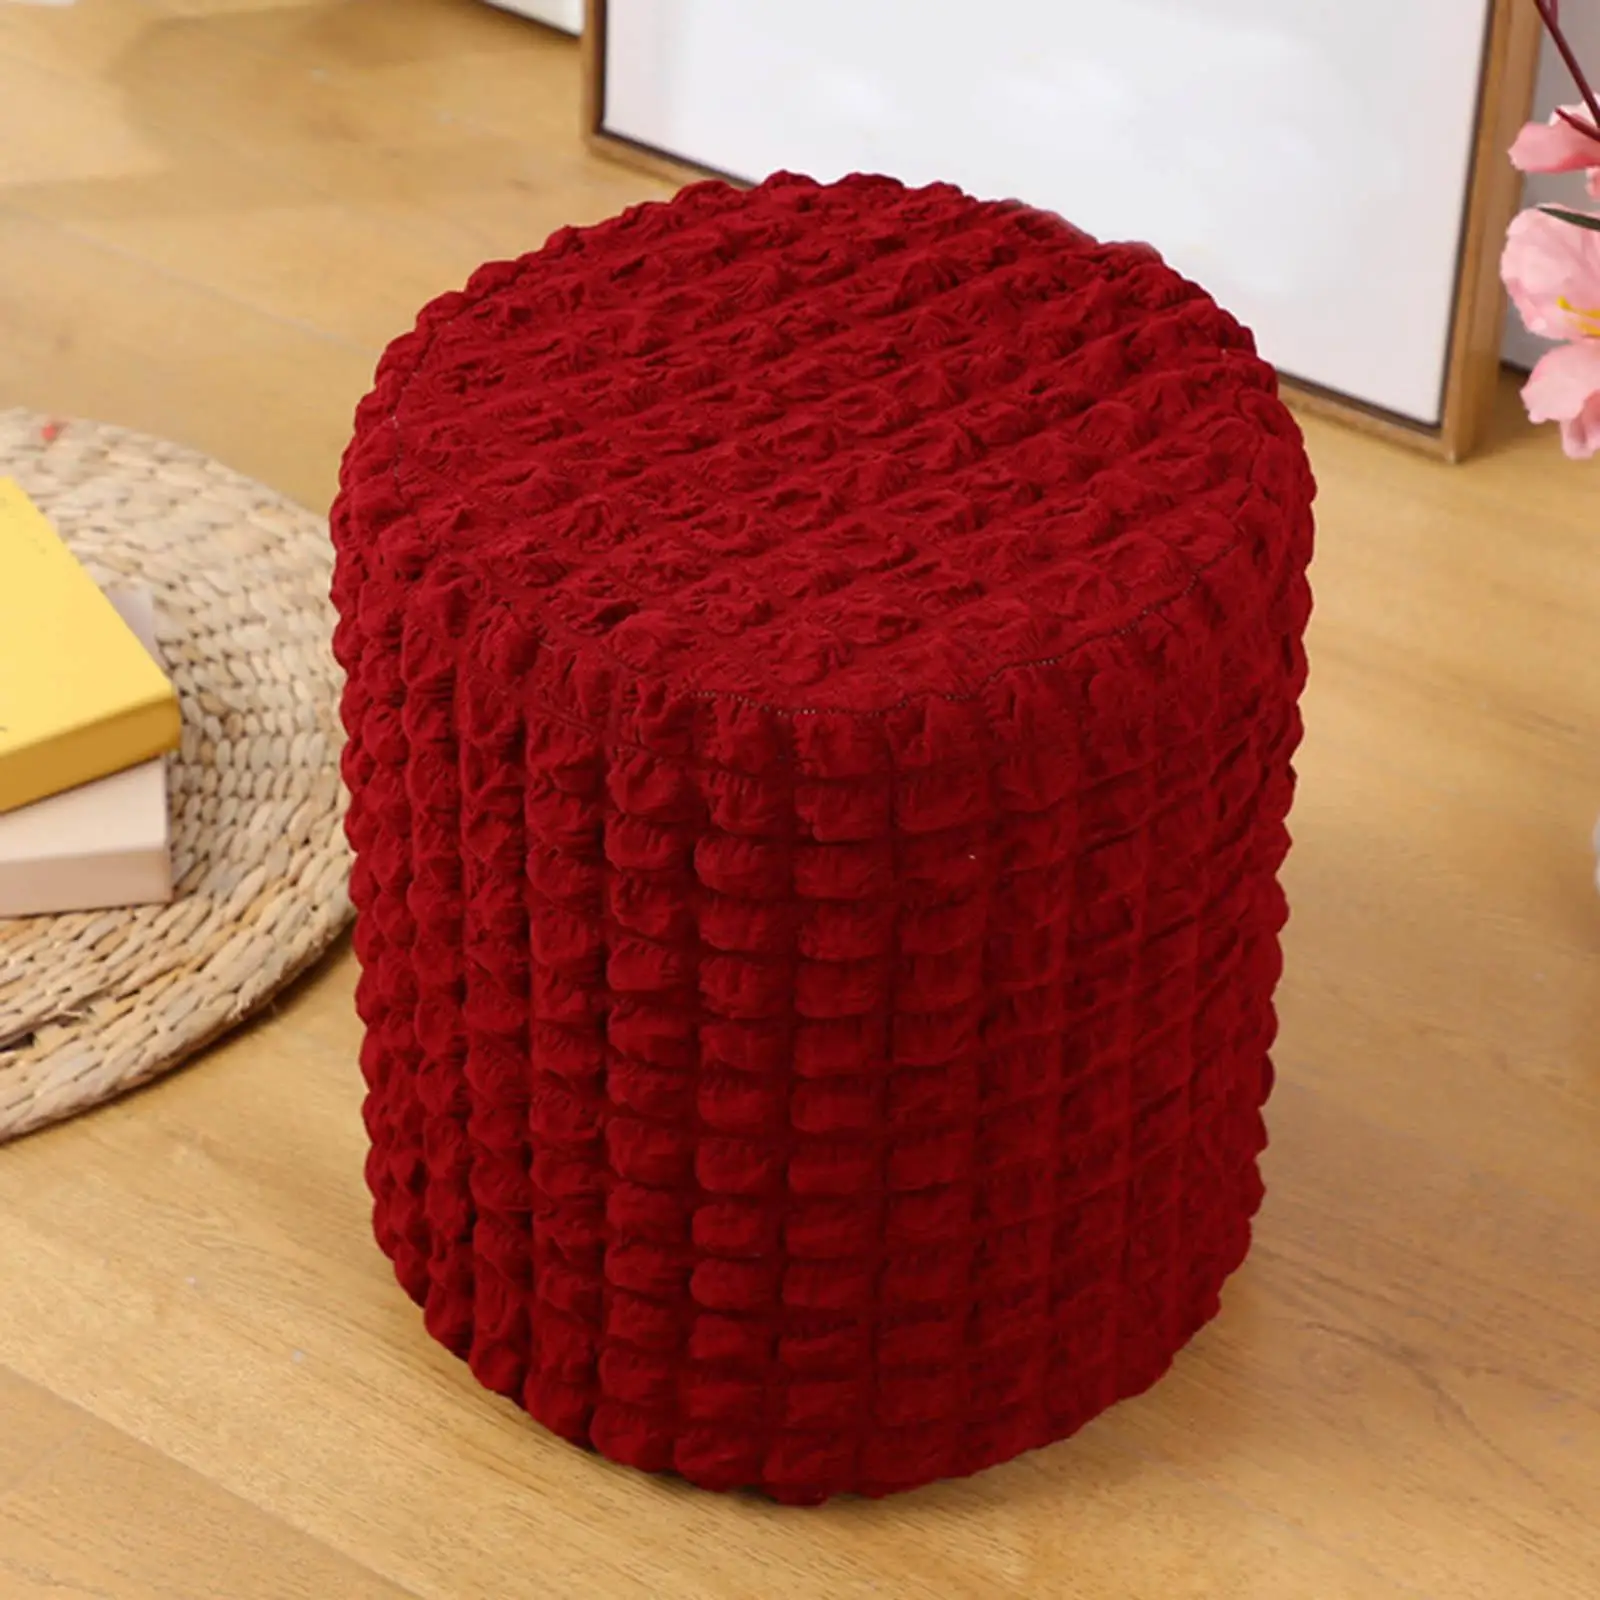 Elastic Ottoman Cover, Ottoman Protector Living Room Furniture Cover Foot Rest Stool Covers for Dining Room Bedroom